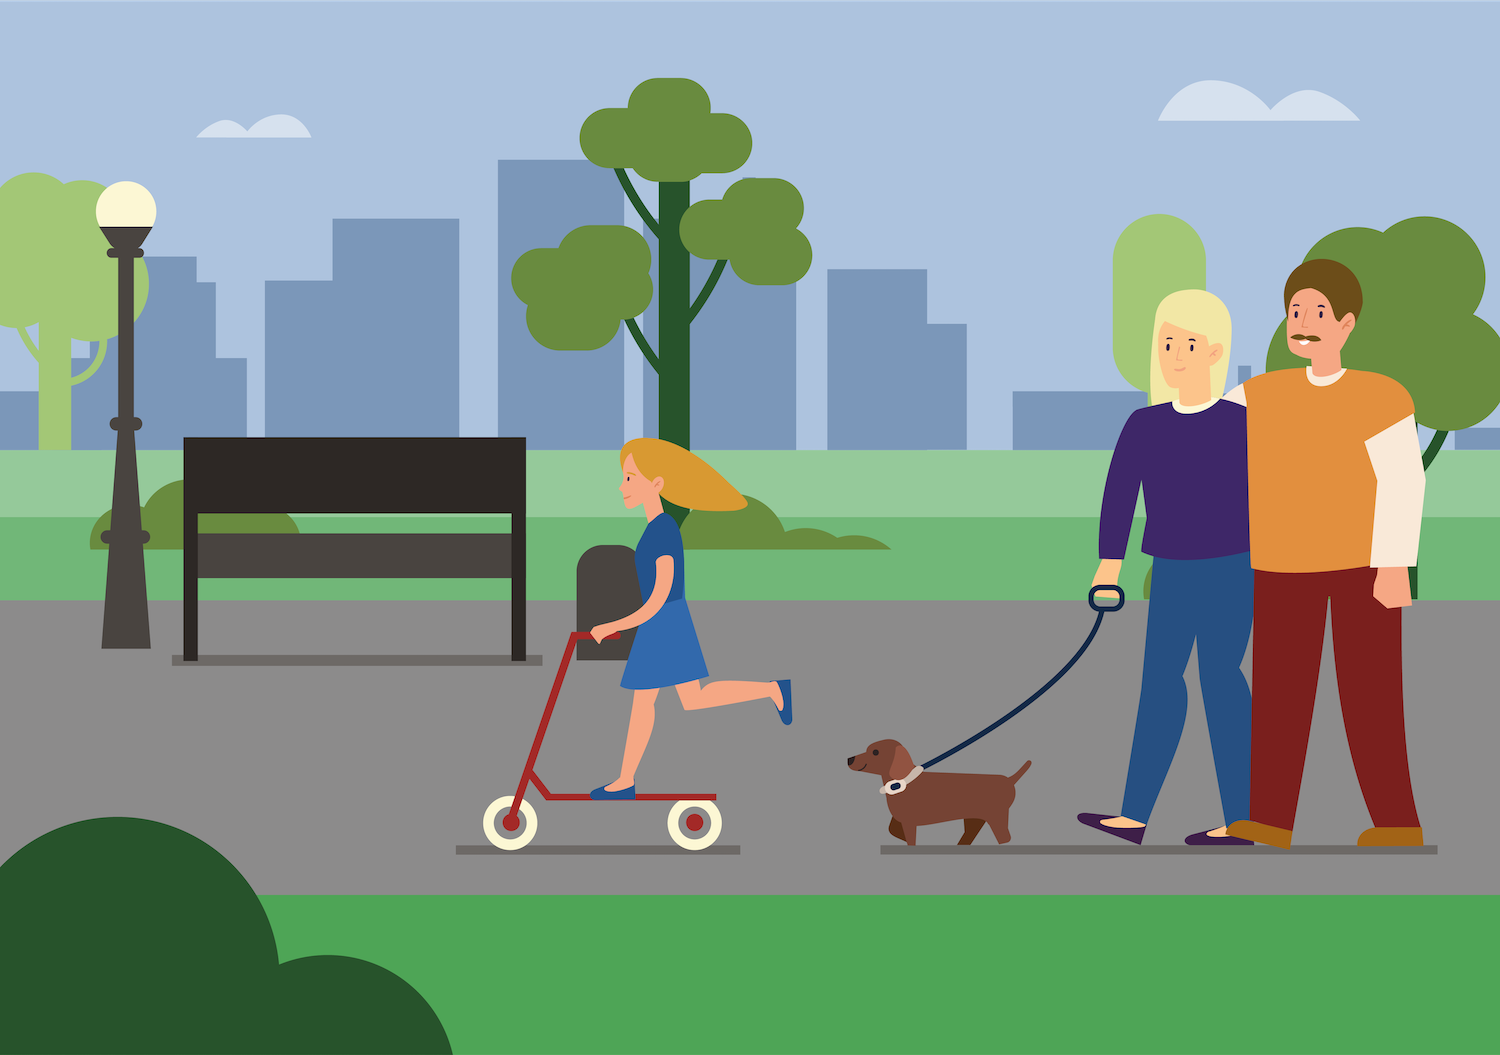 Couple walking through a park with their dog on a leash while their daughtr rides a scooter in front of them